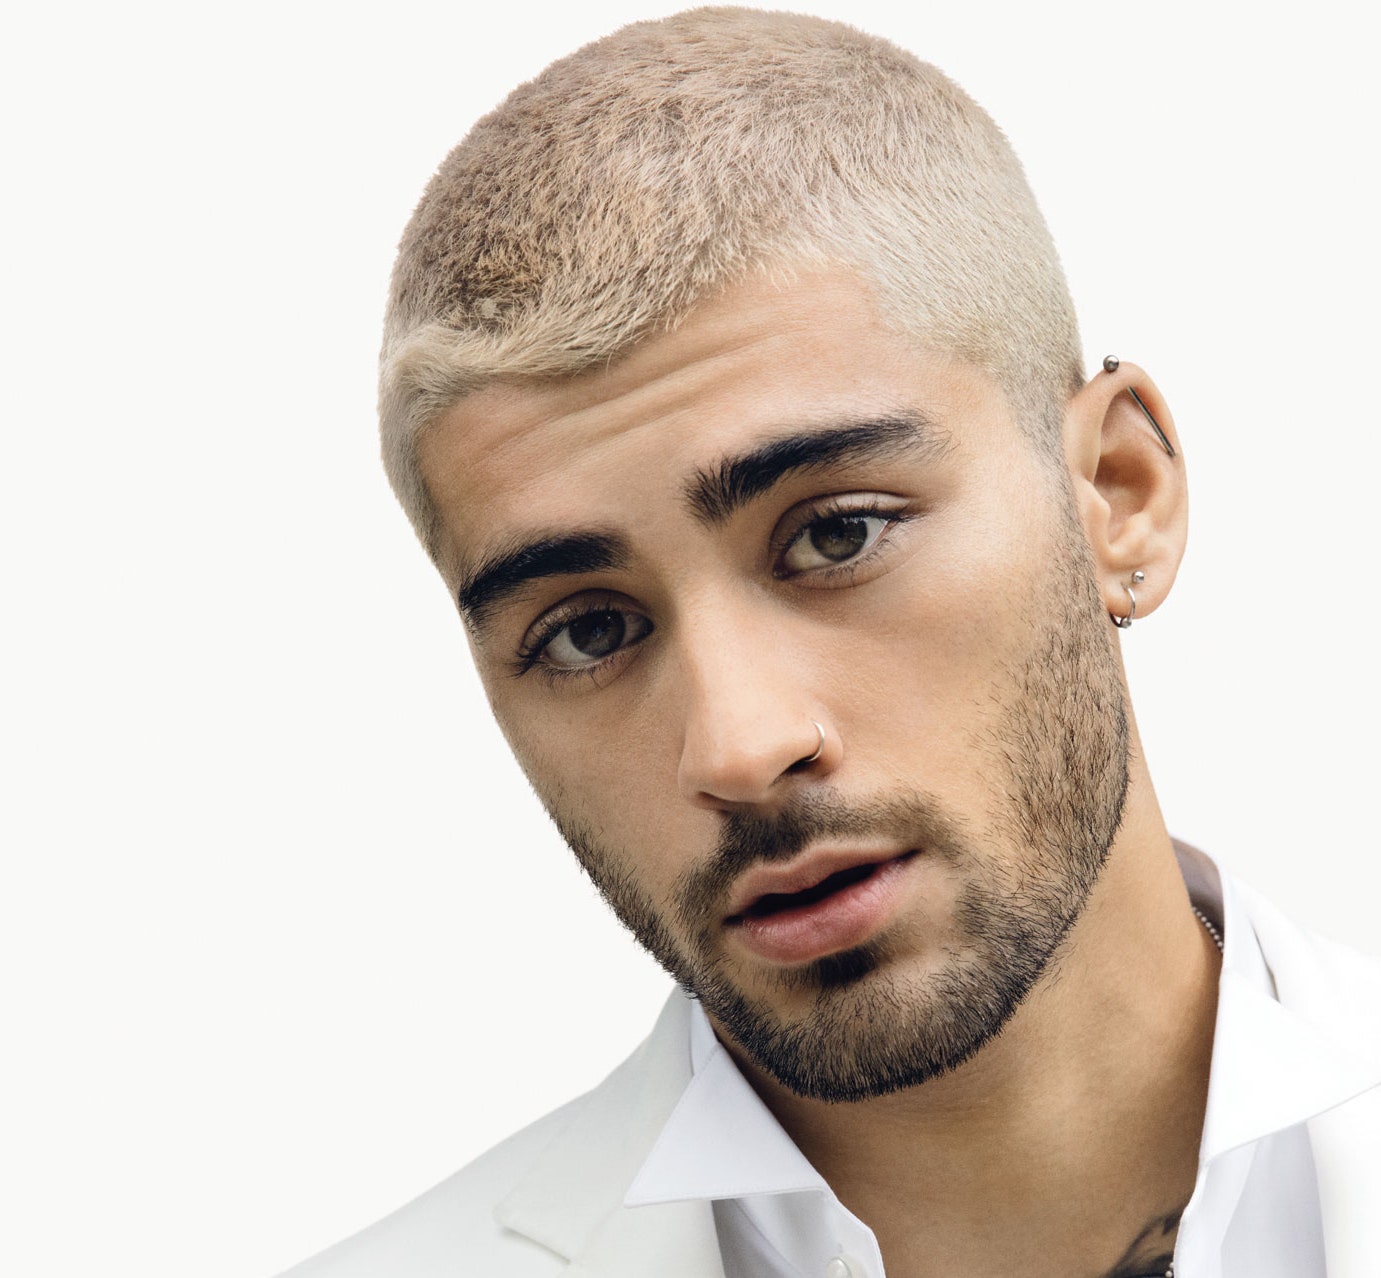 Take Grooming Cues For Your Daily Hairstyle From Ed Sheeran And Zayn Malik  | IWMBuzz